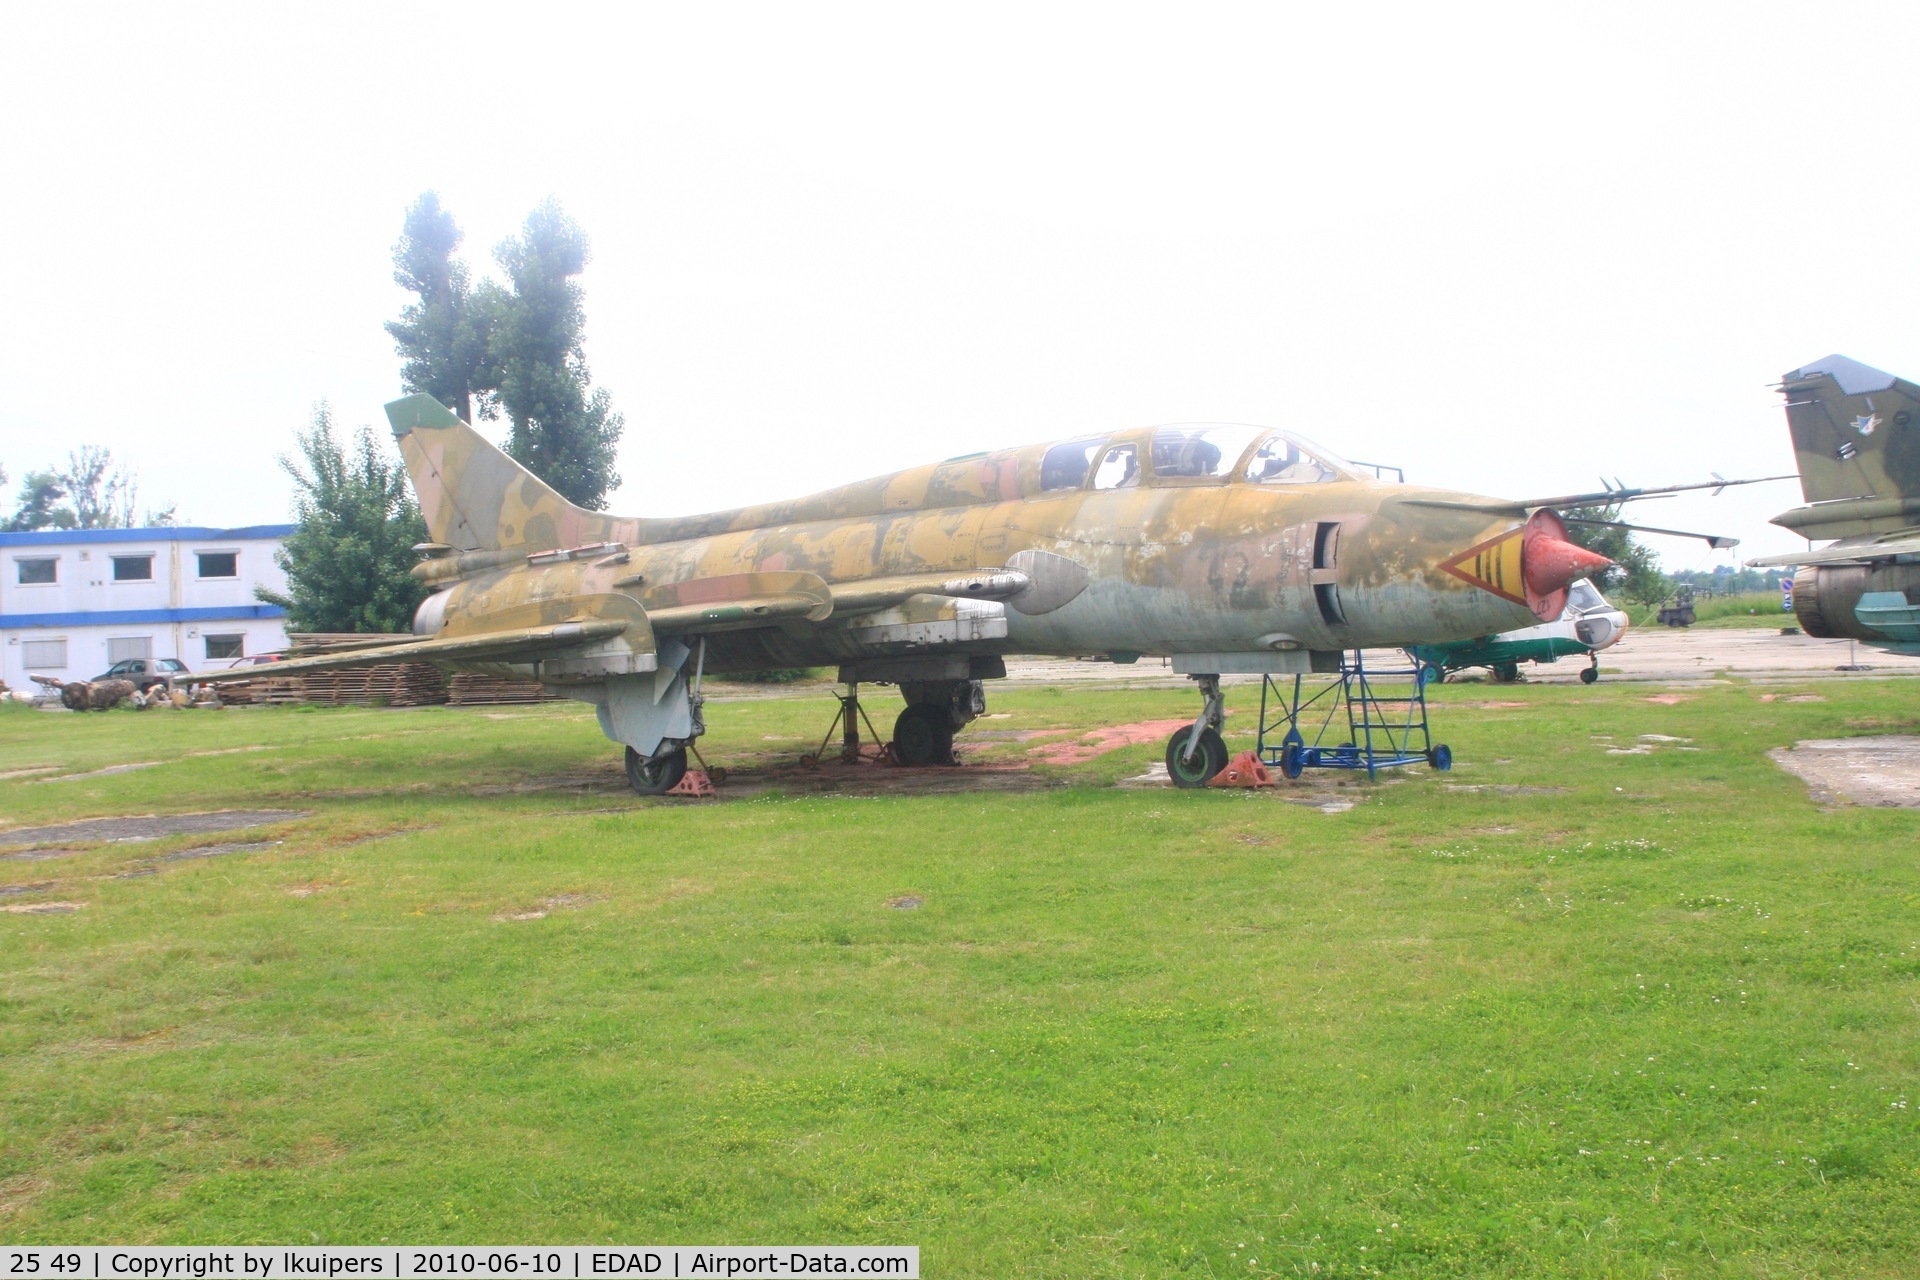 25 49, Sukhoi Su-22UM-3K C/N 17532367003, This Sukhoi Su22UM 3K has been preserved at the Junkers Technical Museum in Dessau. Markings are barely visible.